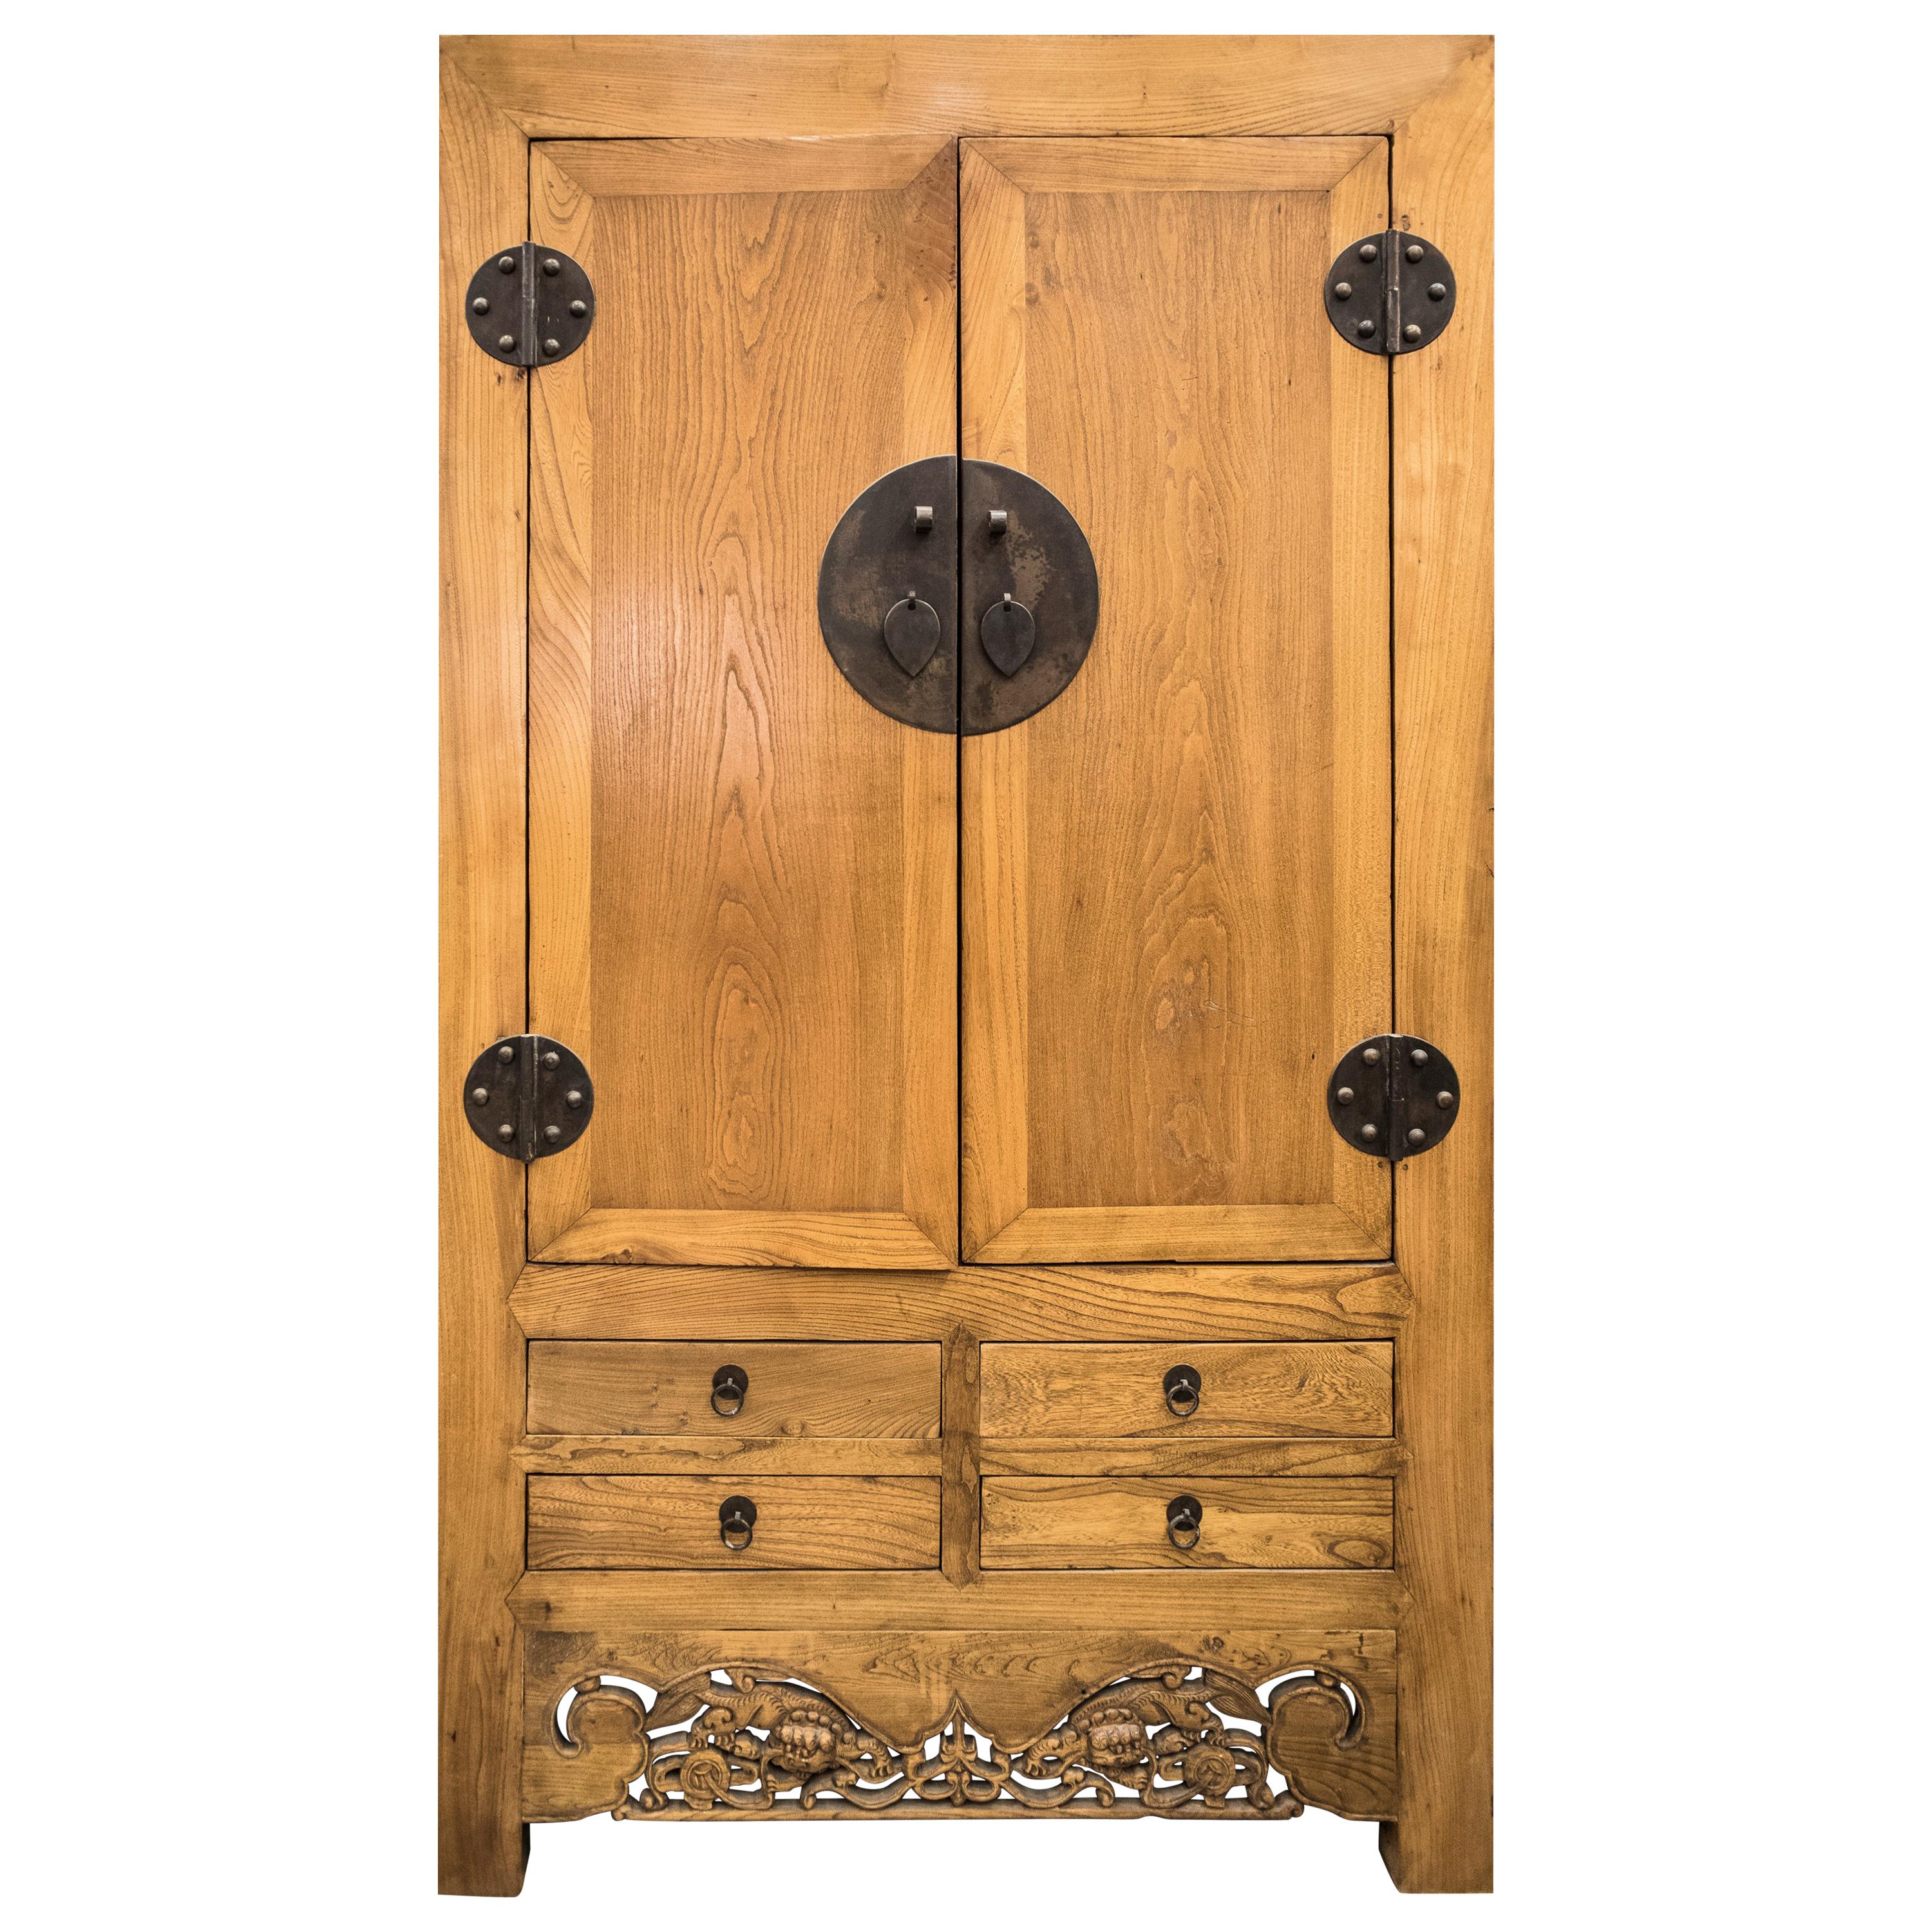 1970's Carved Elm Wood Chinese Wardrobe